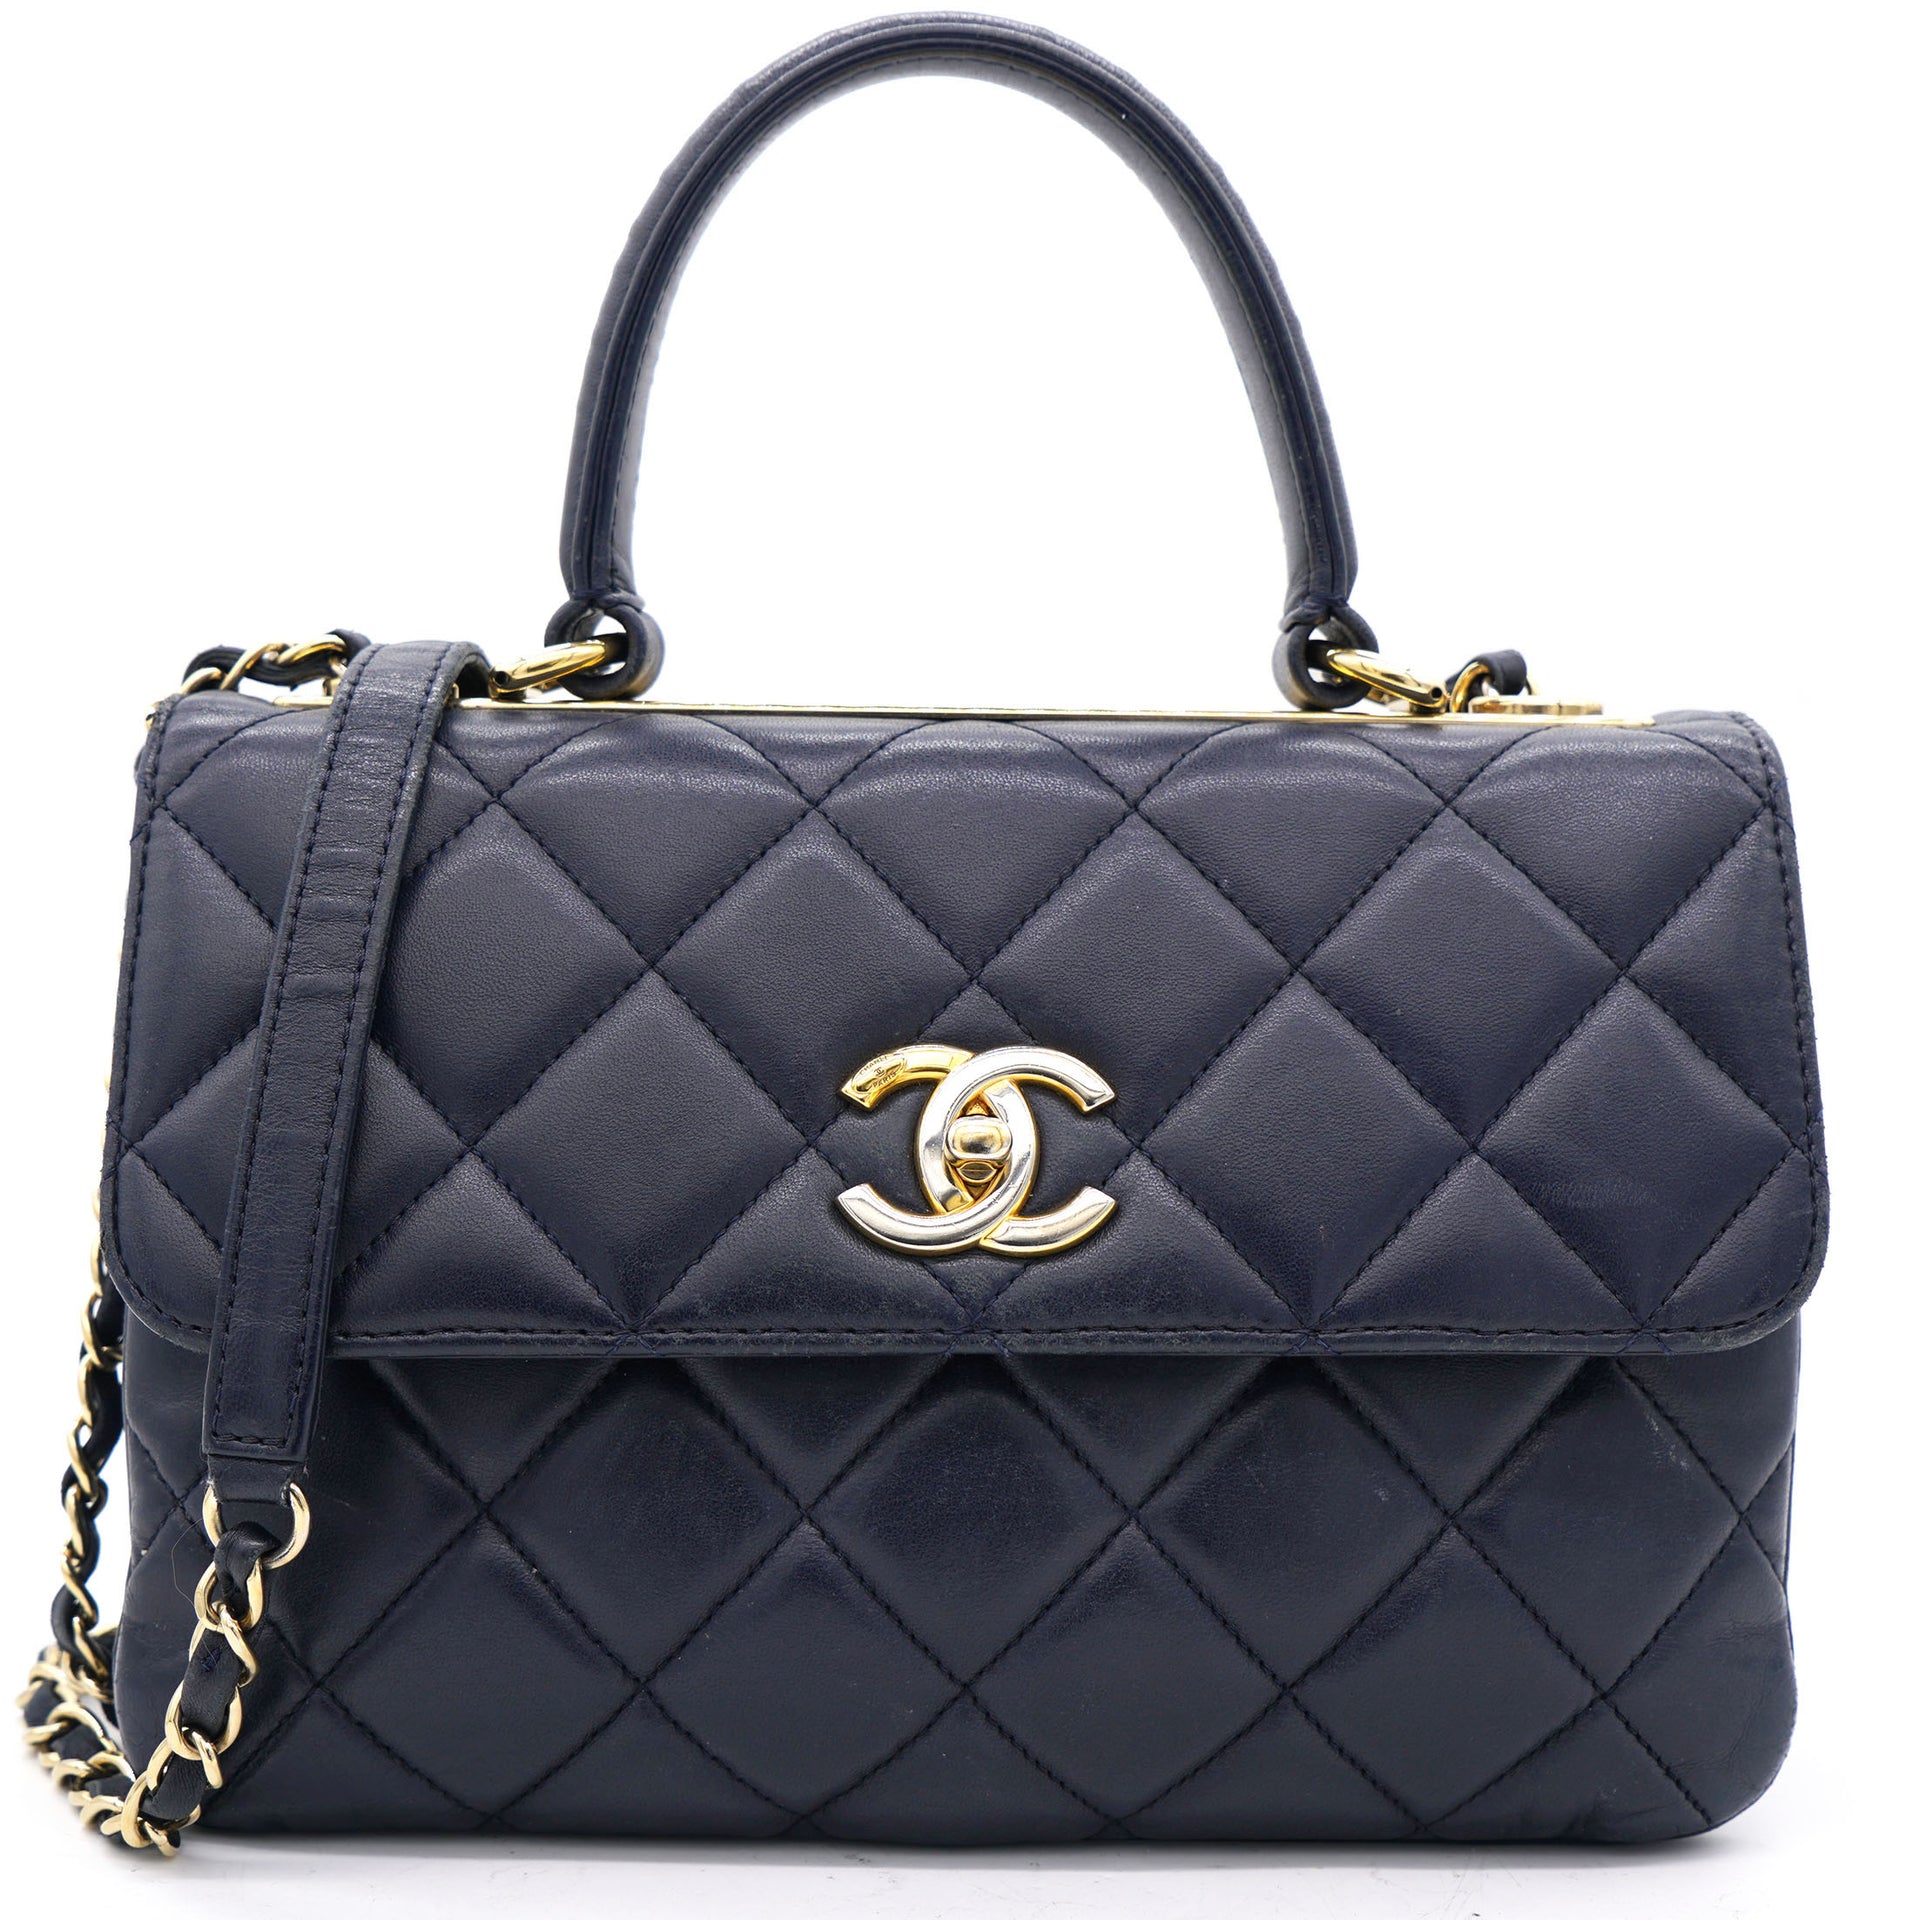 Chanel Small Light Blue Vanity Bag  Rent Chanel Handbags for 195month